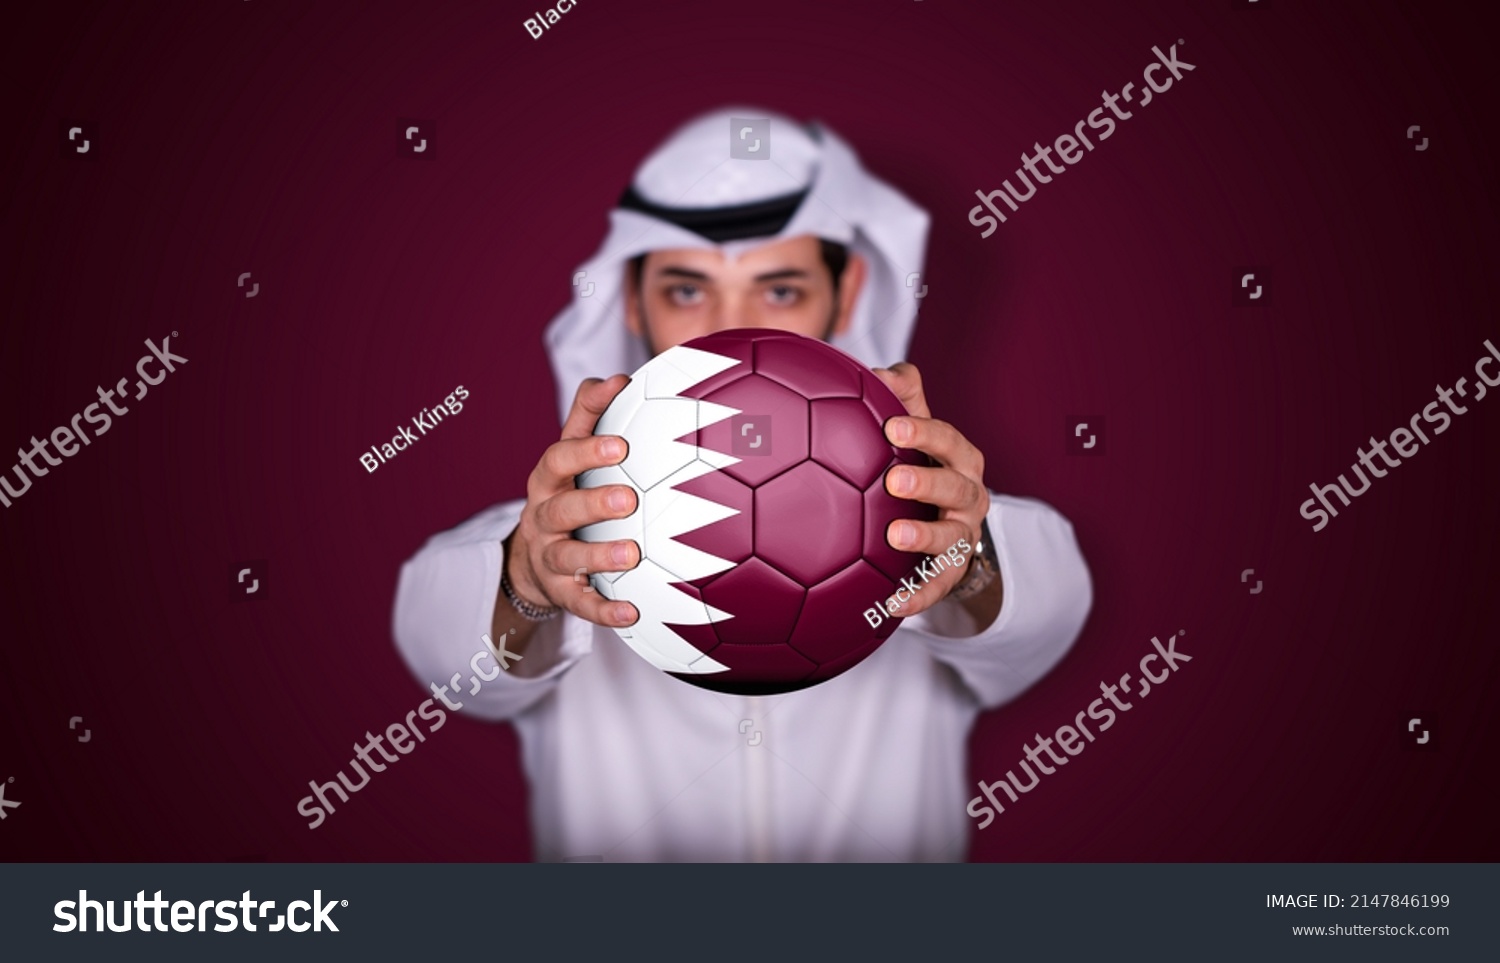 Arab man holding soccer ball in hand with Qatar flag standing on red background. #2147846199